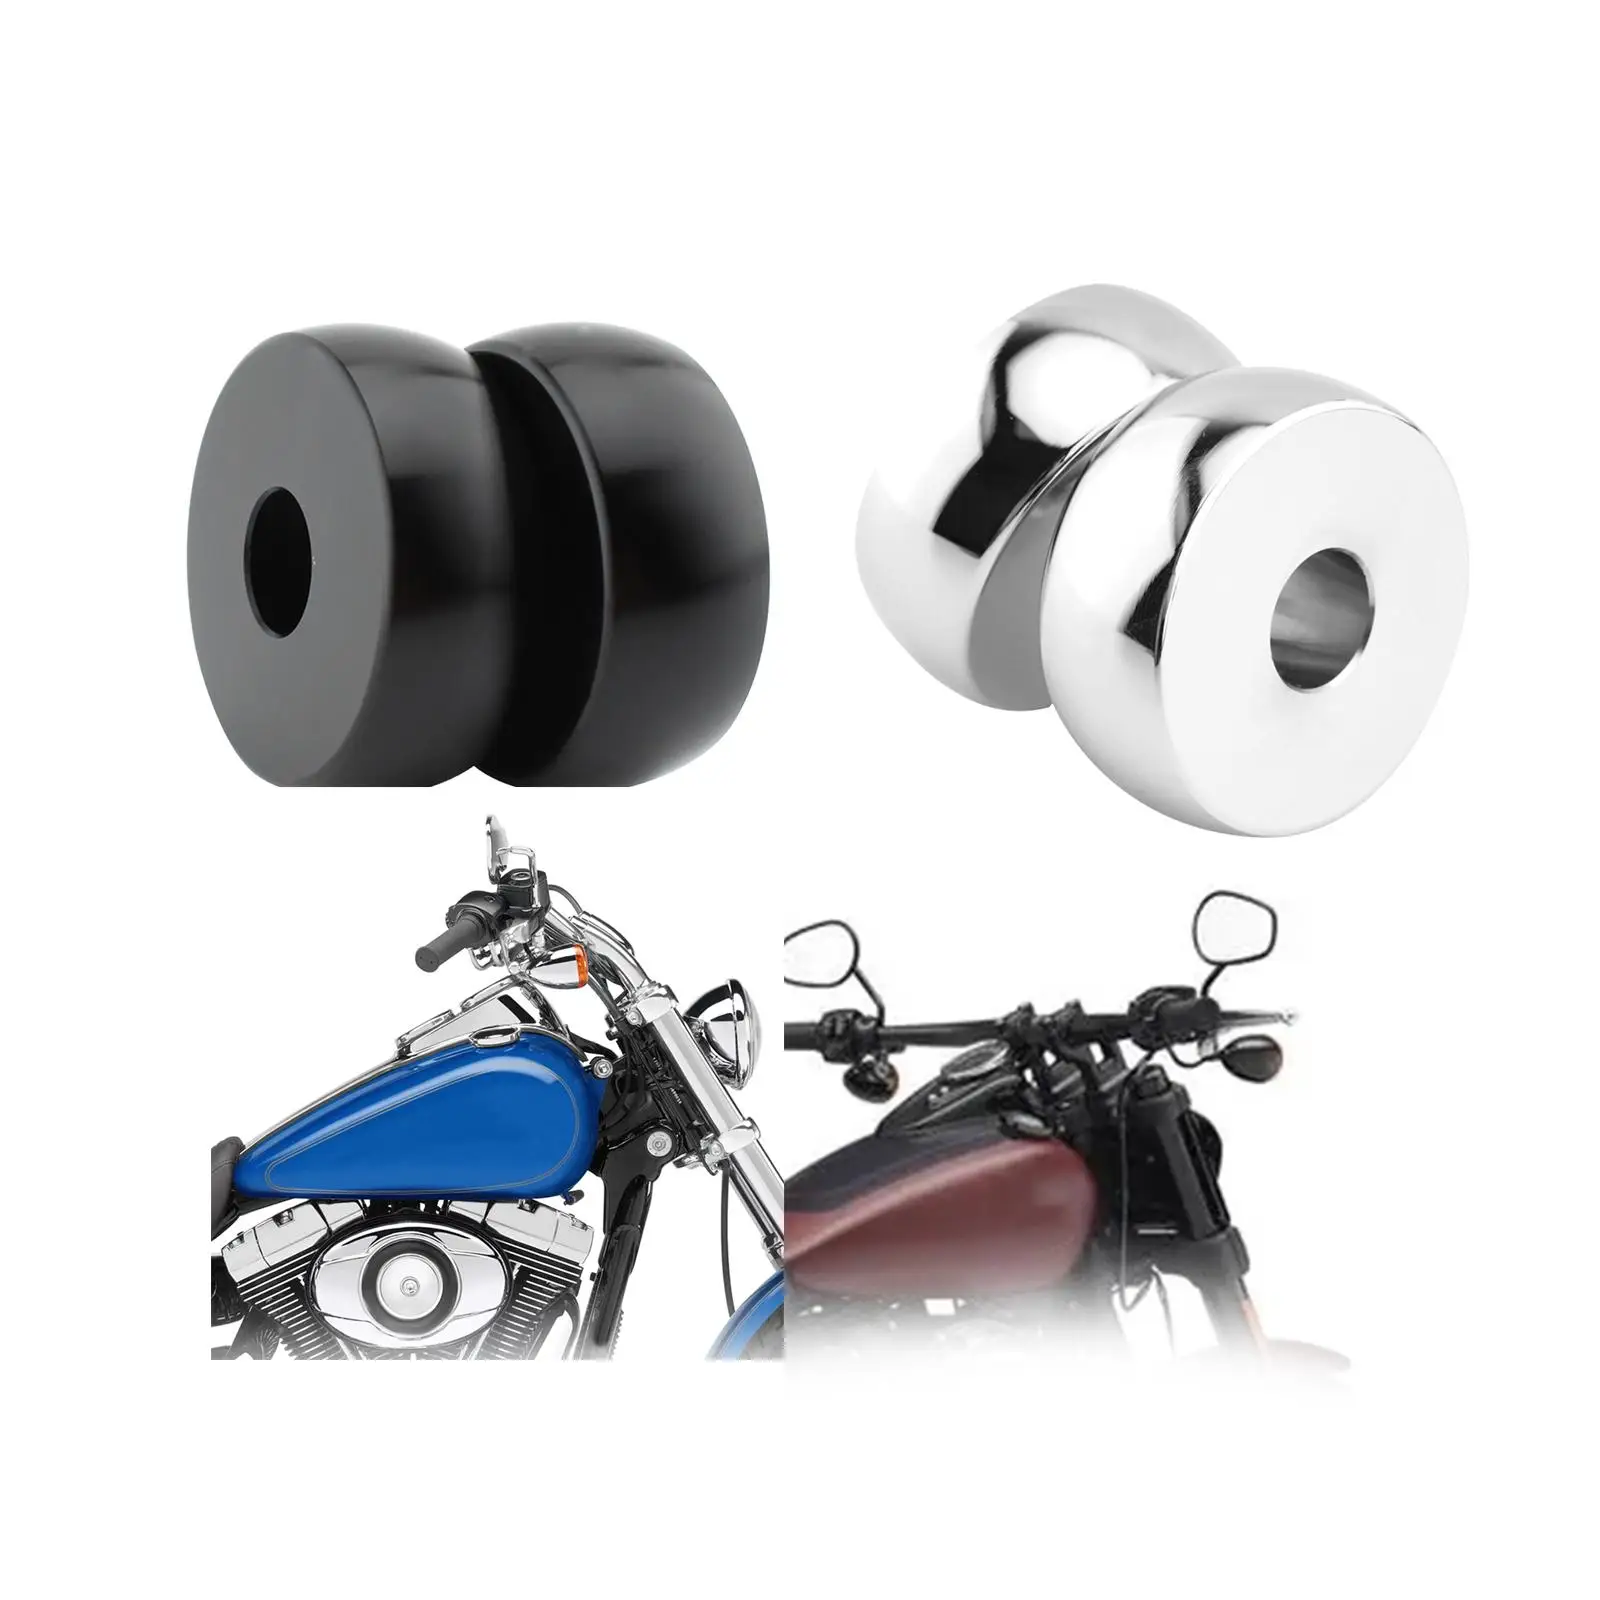 2Pcs Motorcycle Handlebar Risers for Fxdl